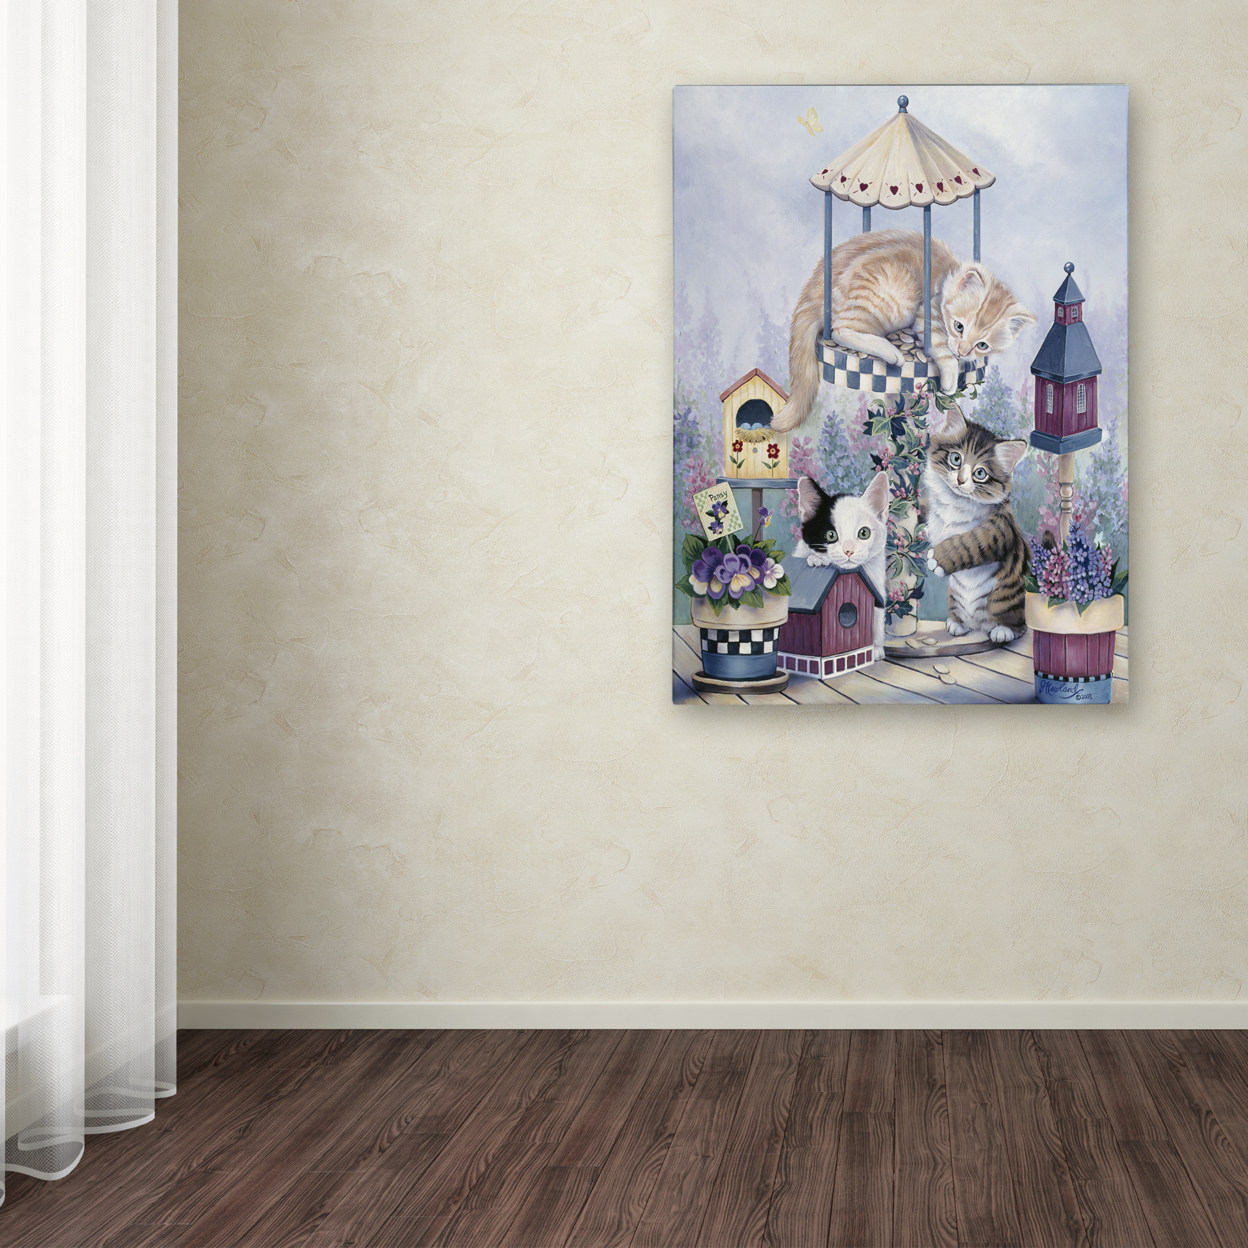 Jenny Newland 'Cat Carousel' Canvas Wall Art 35 X 47 Inches